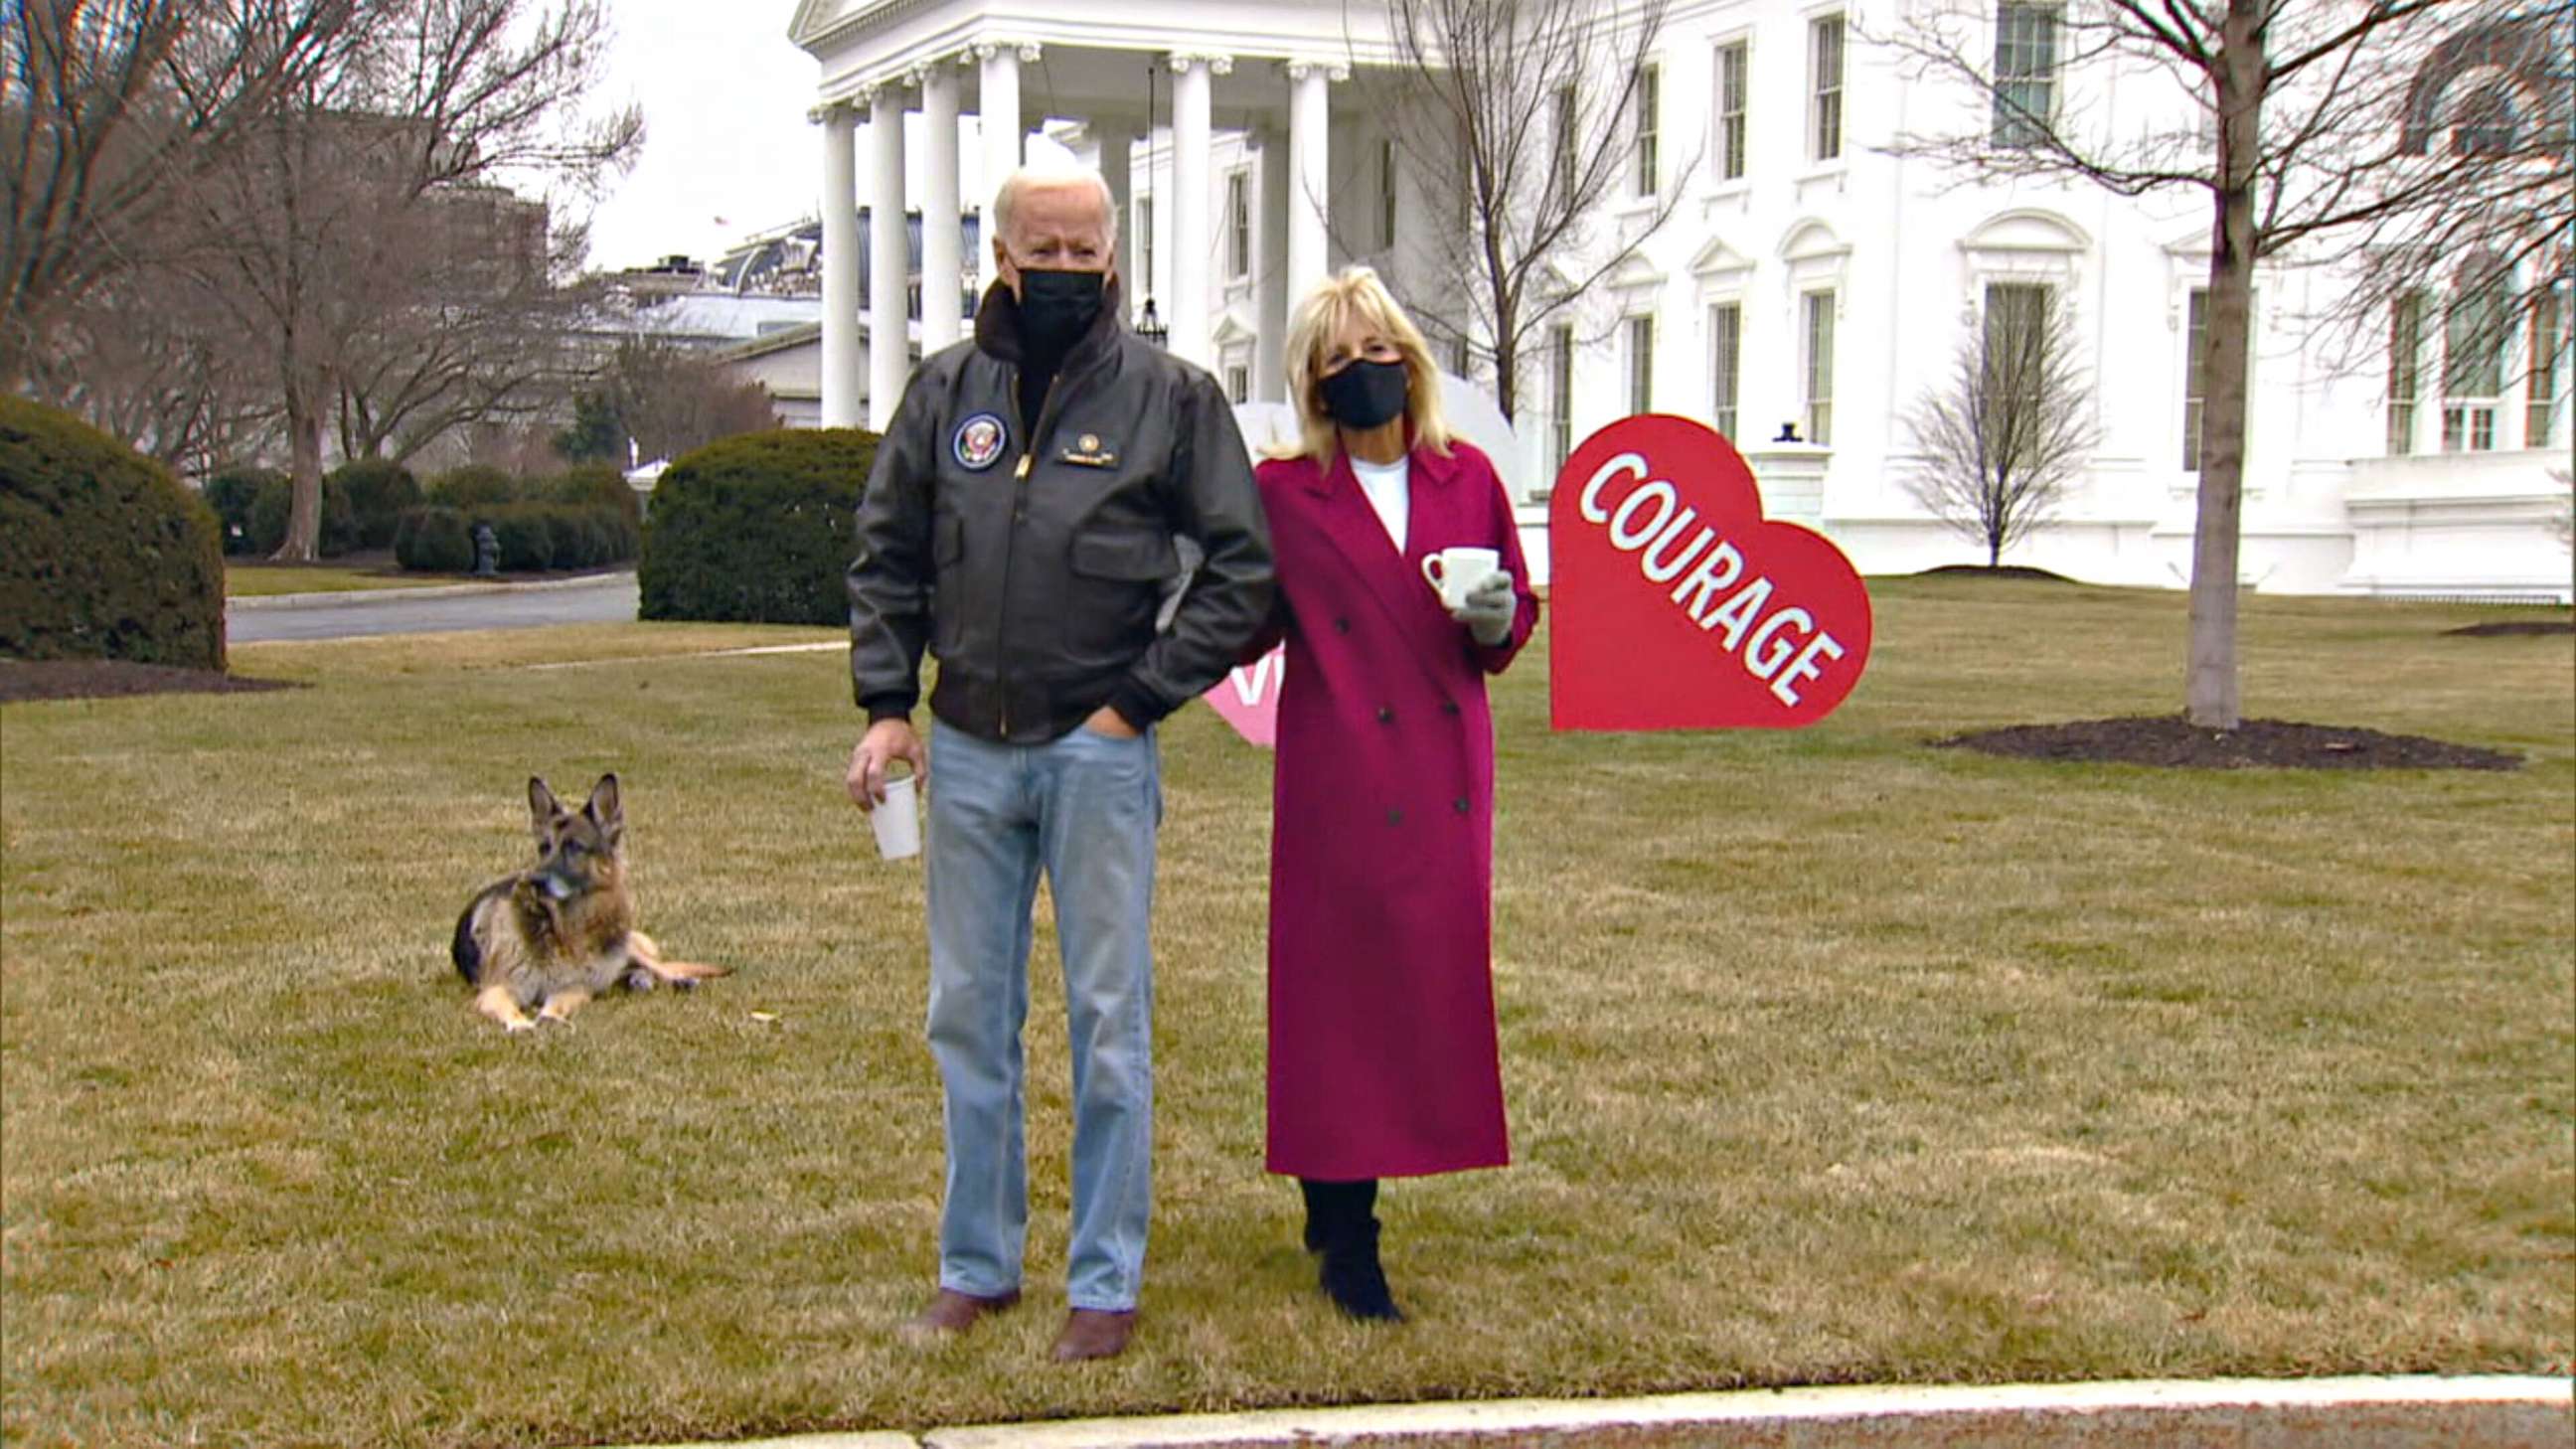 PHOTO: First lady Jill Biden and President Joe Biden look at the Valentines Jill Biden had installed overnight on the White House lawn, early Feb. 12, 2021.